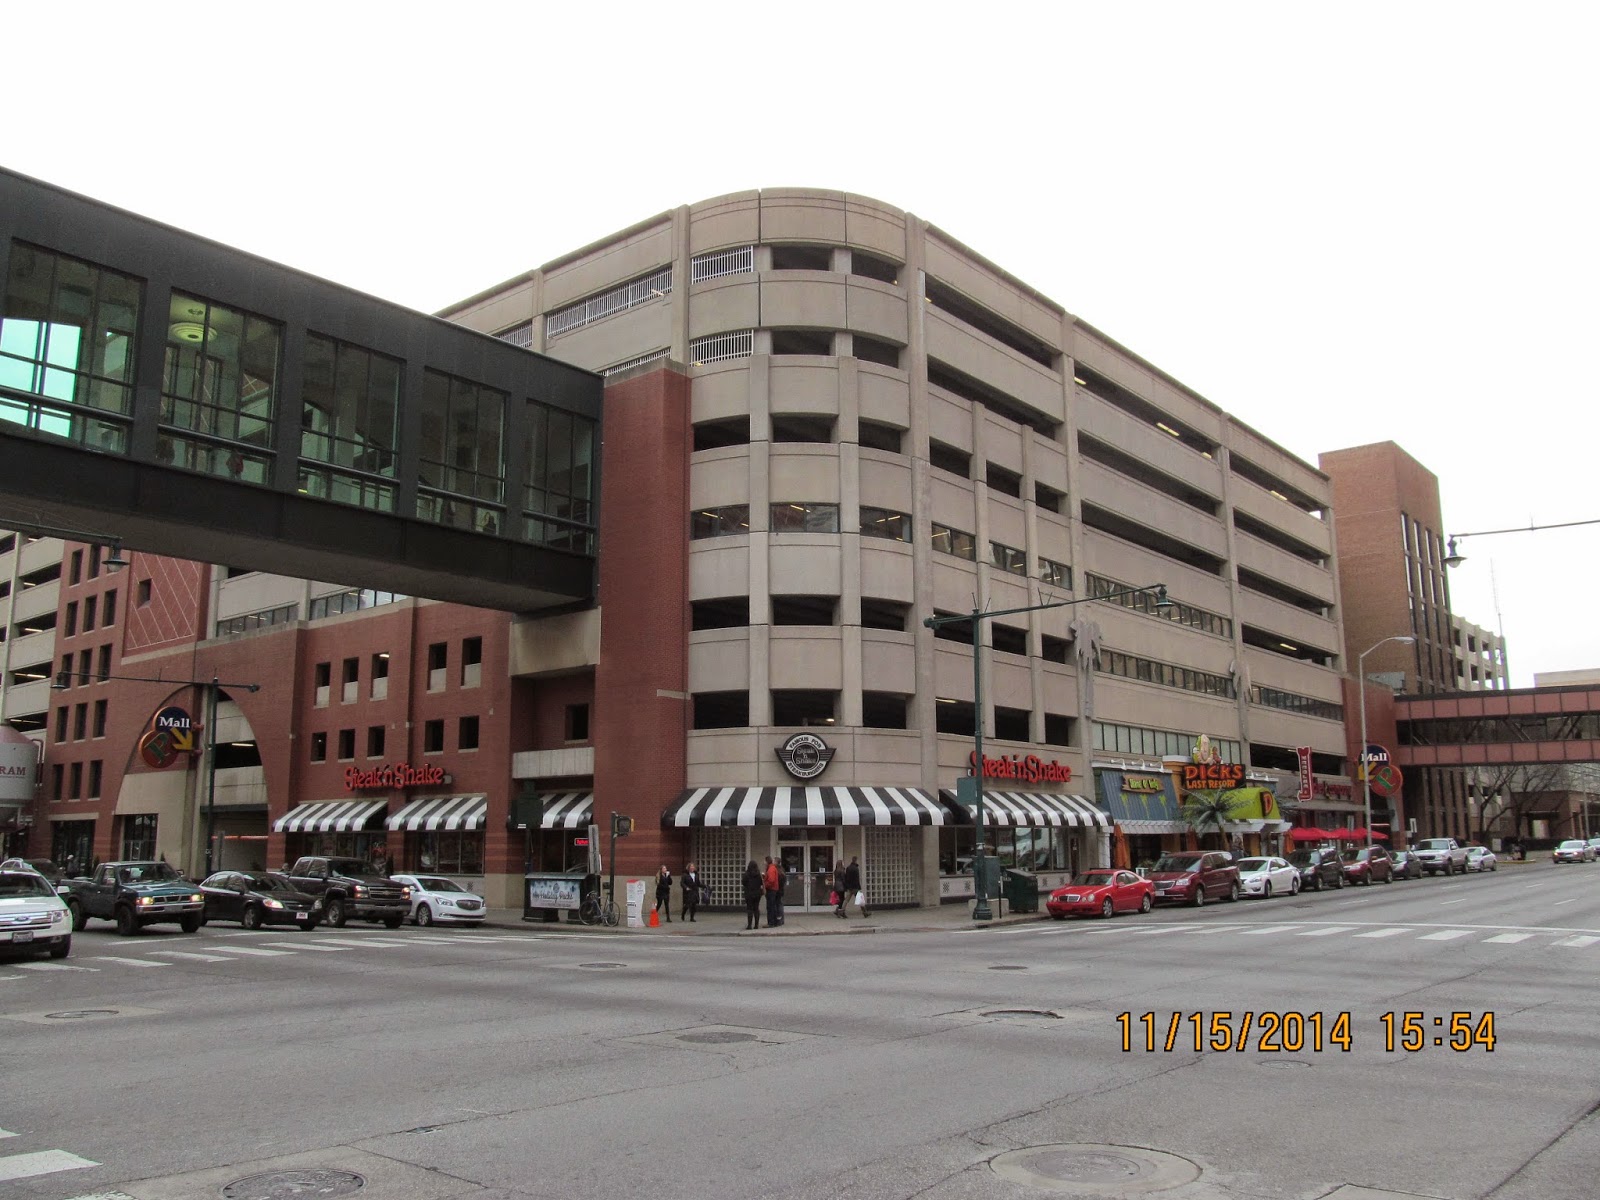 Trip to the Mall: Circle Centre Mall- (Indianapolis, IN)